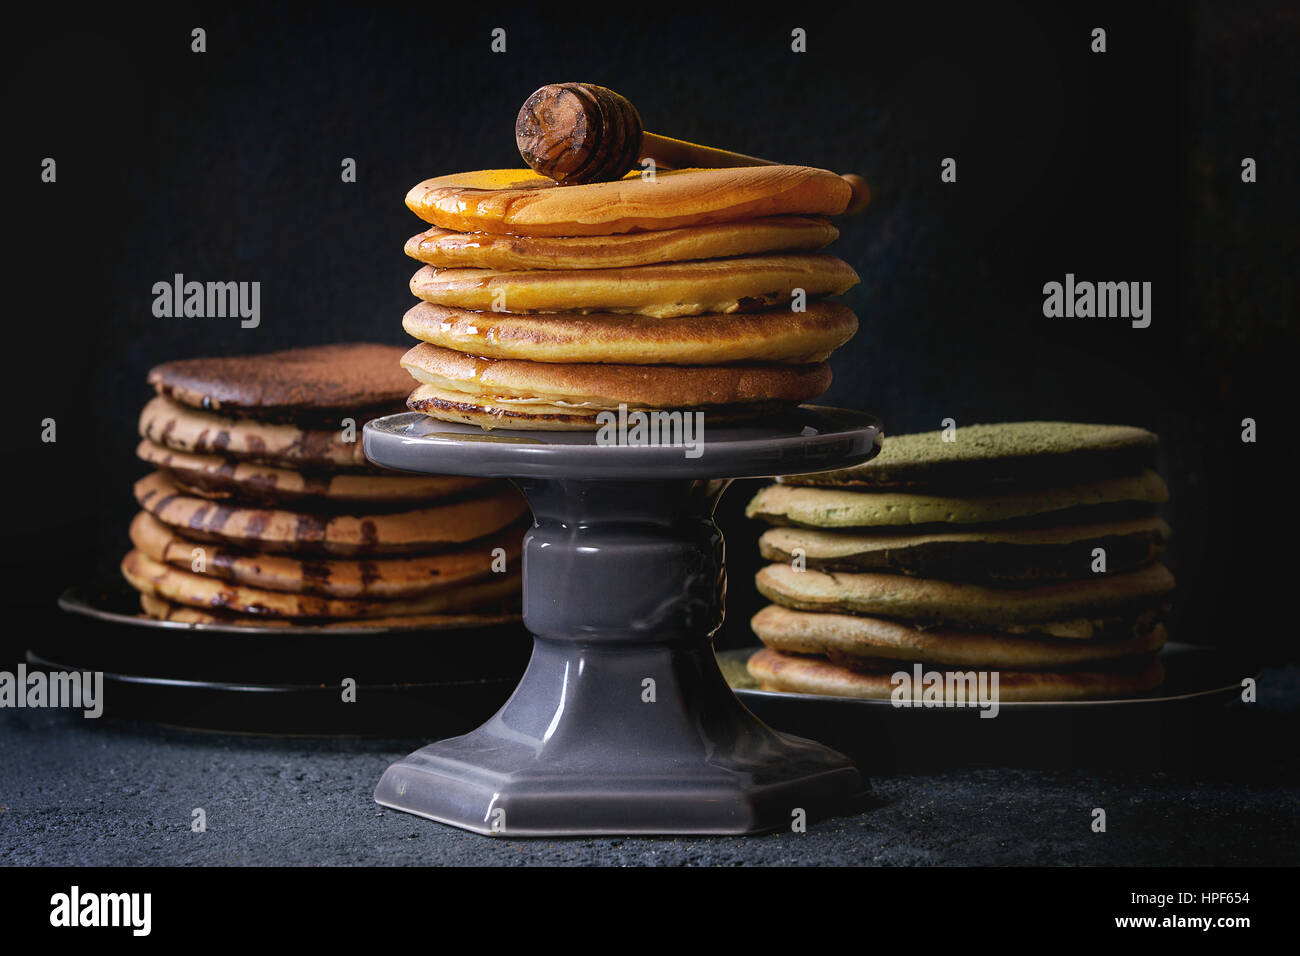 variety of homemade american ombre chocolate, green tea matcha and turmeric pancakes with honey and sauce served on plates and cake stand over black s Stock Photo